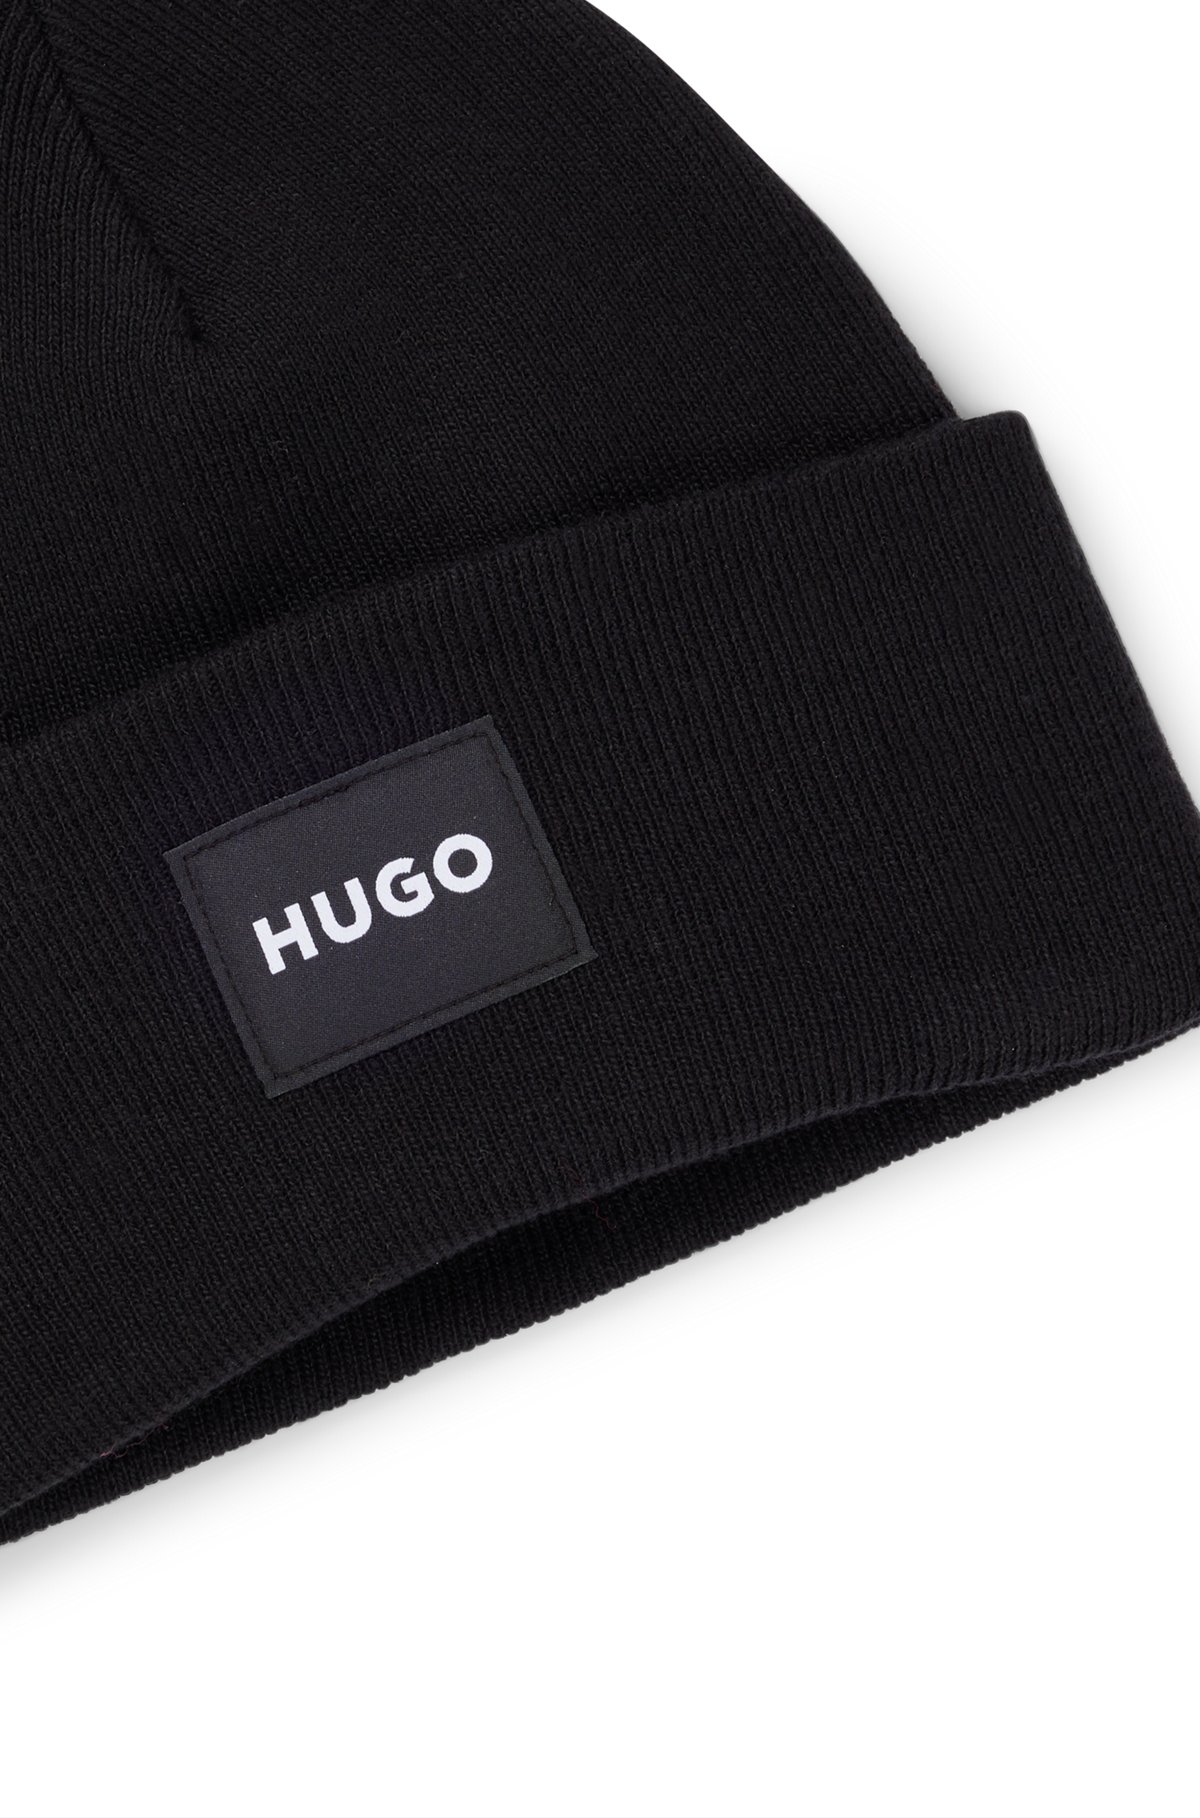 Knitted beanie hat with logo detail, Black